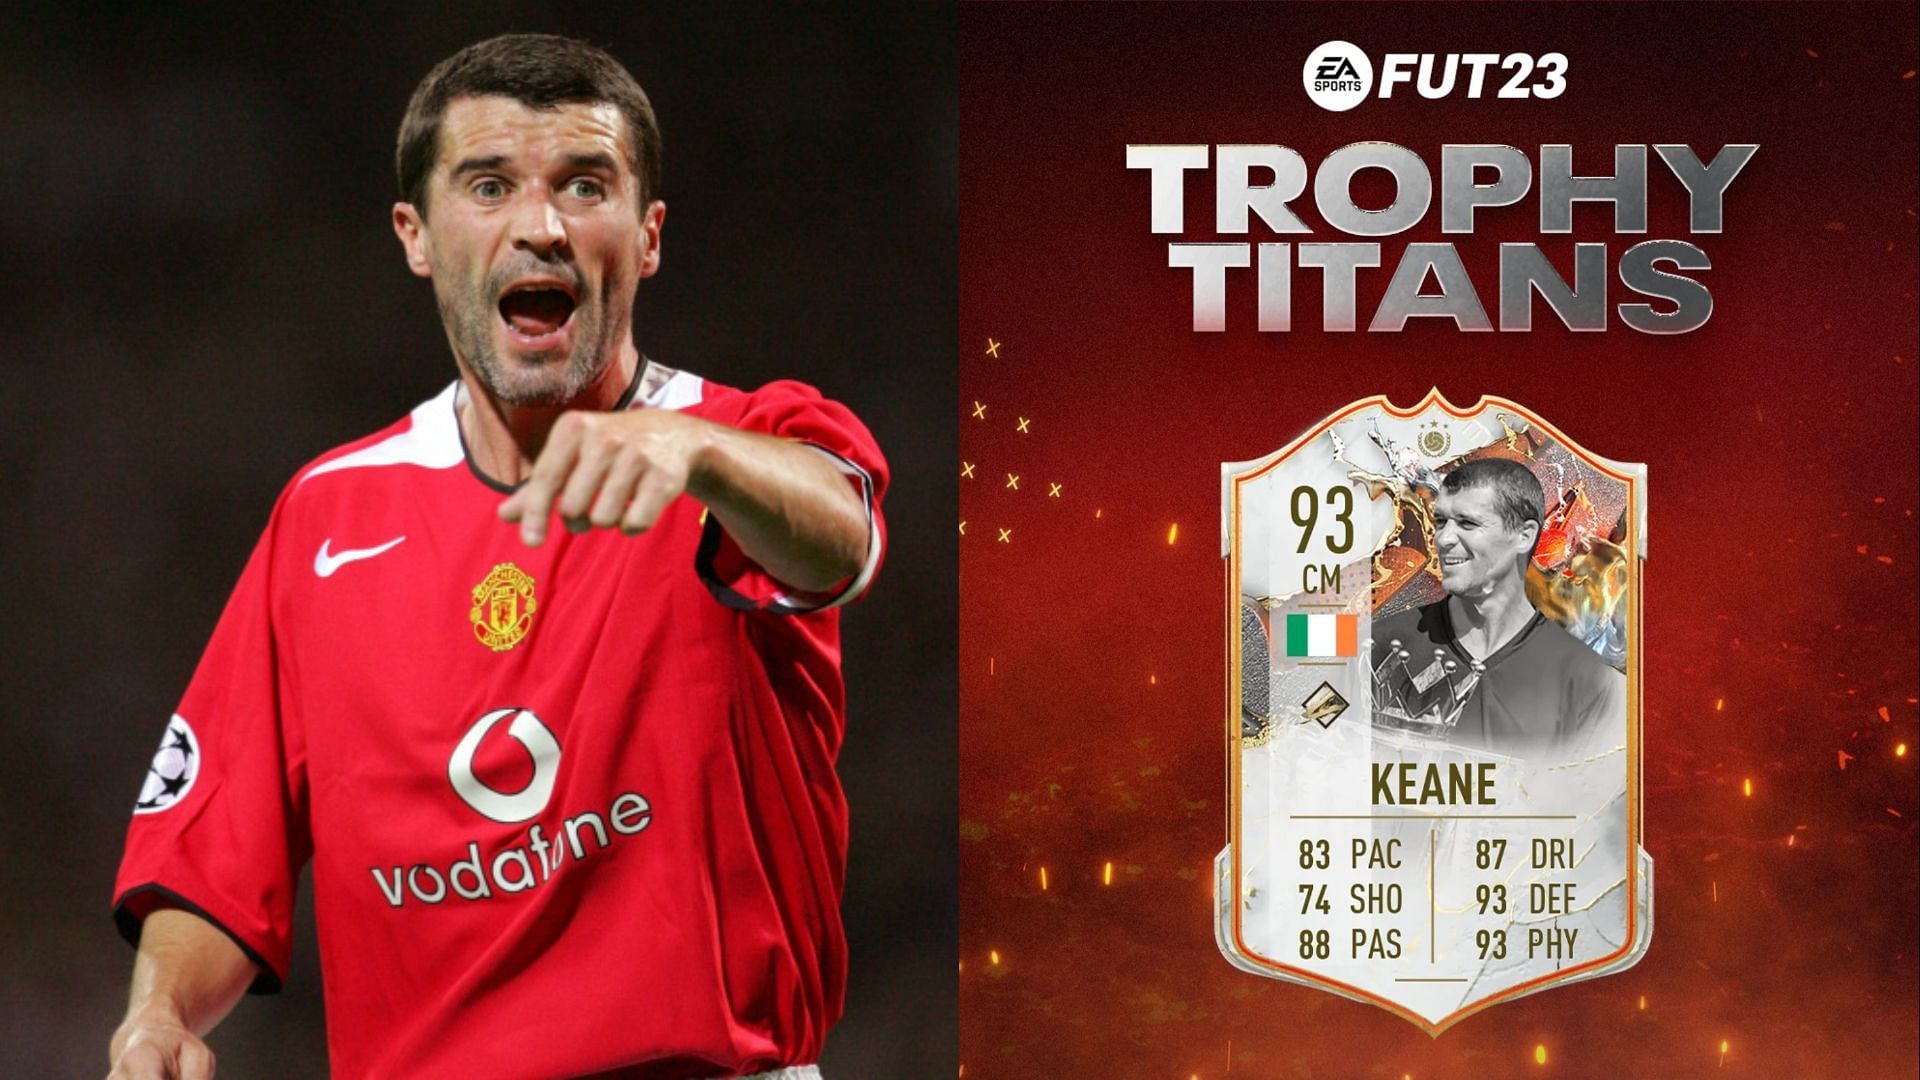 FIFA 23 players can get a defensive rock by completing the Roy Keane Trophy Titans SBC (Images via Transfermarkt, EA Sports)